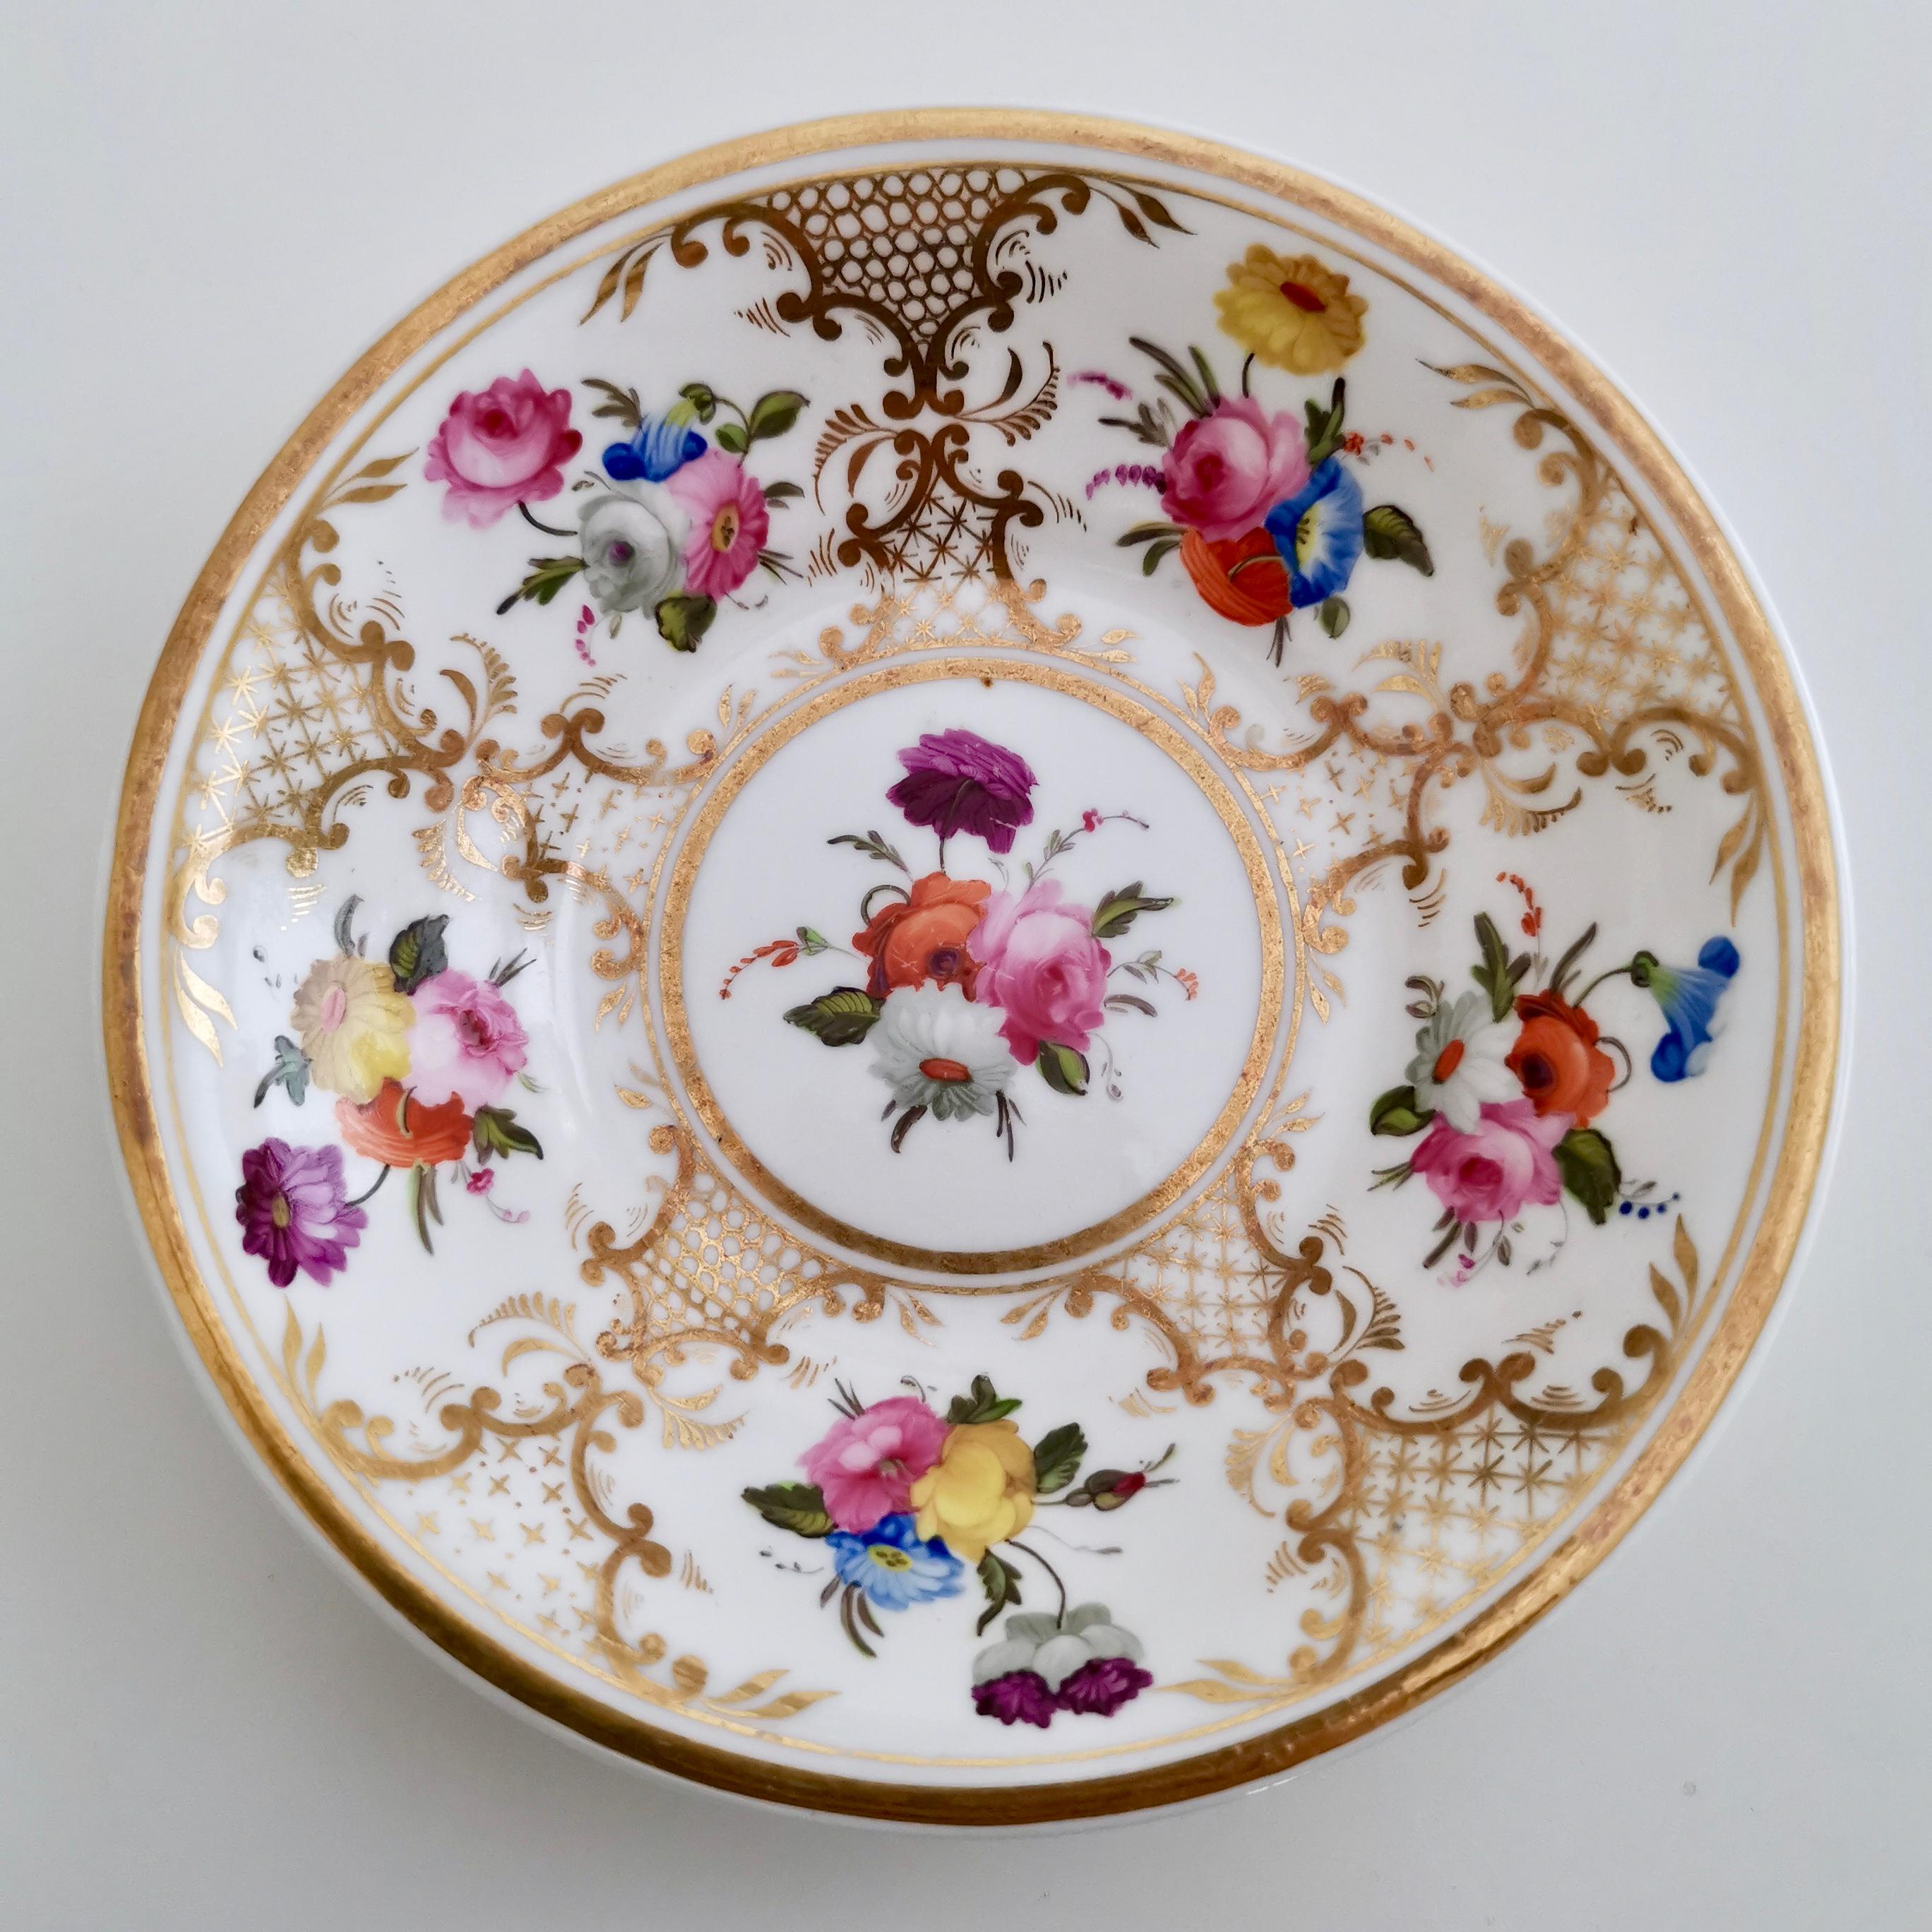 Early 19th Century Rathbone Porcelain Teacup Trio, Hand Painted Flowers and Gilt, Regency ca 1820